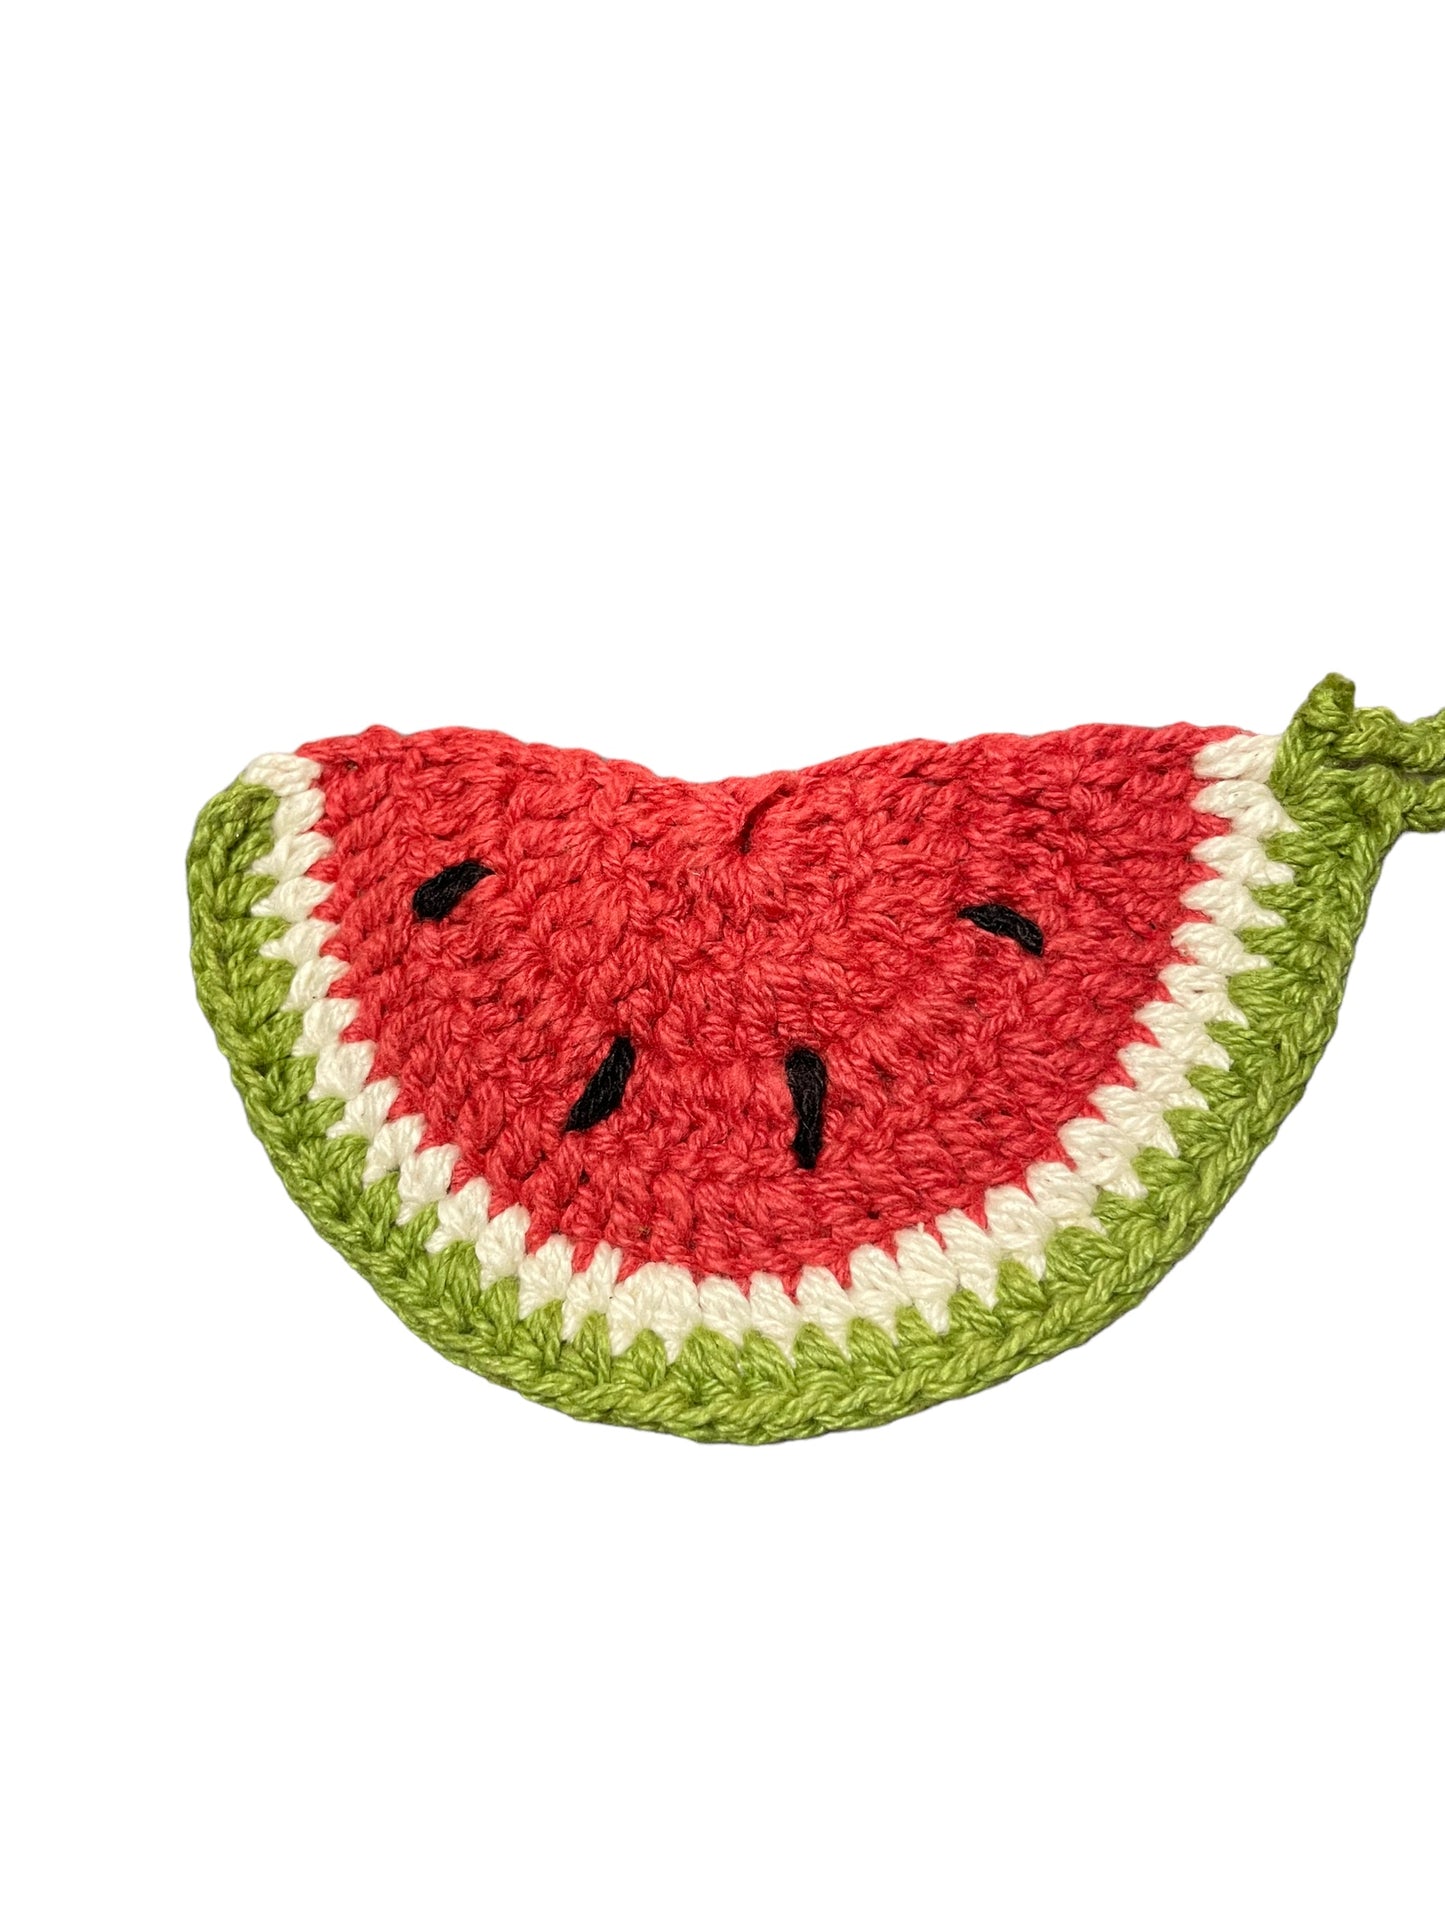 Cotton Crocheted Fruit Shaped Dish Scrubber w/ Loop, 4 Styles